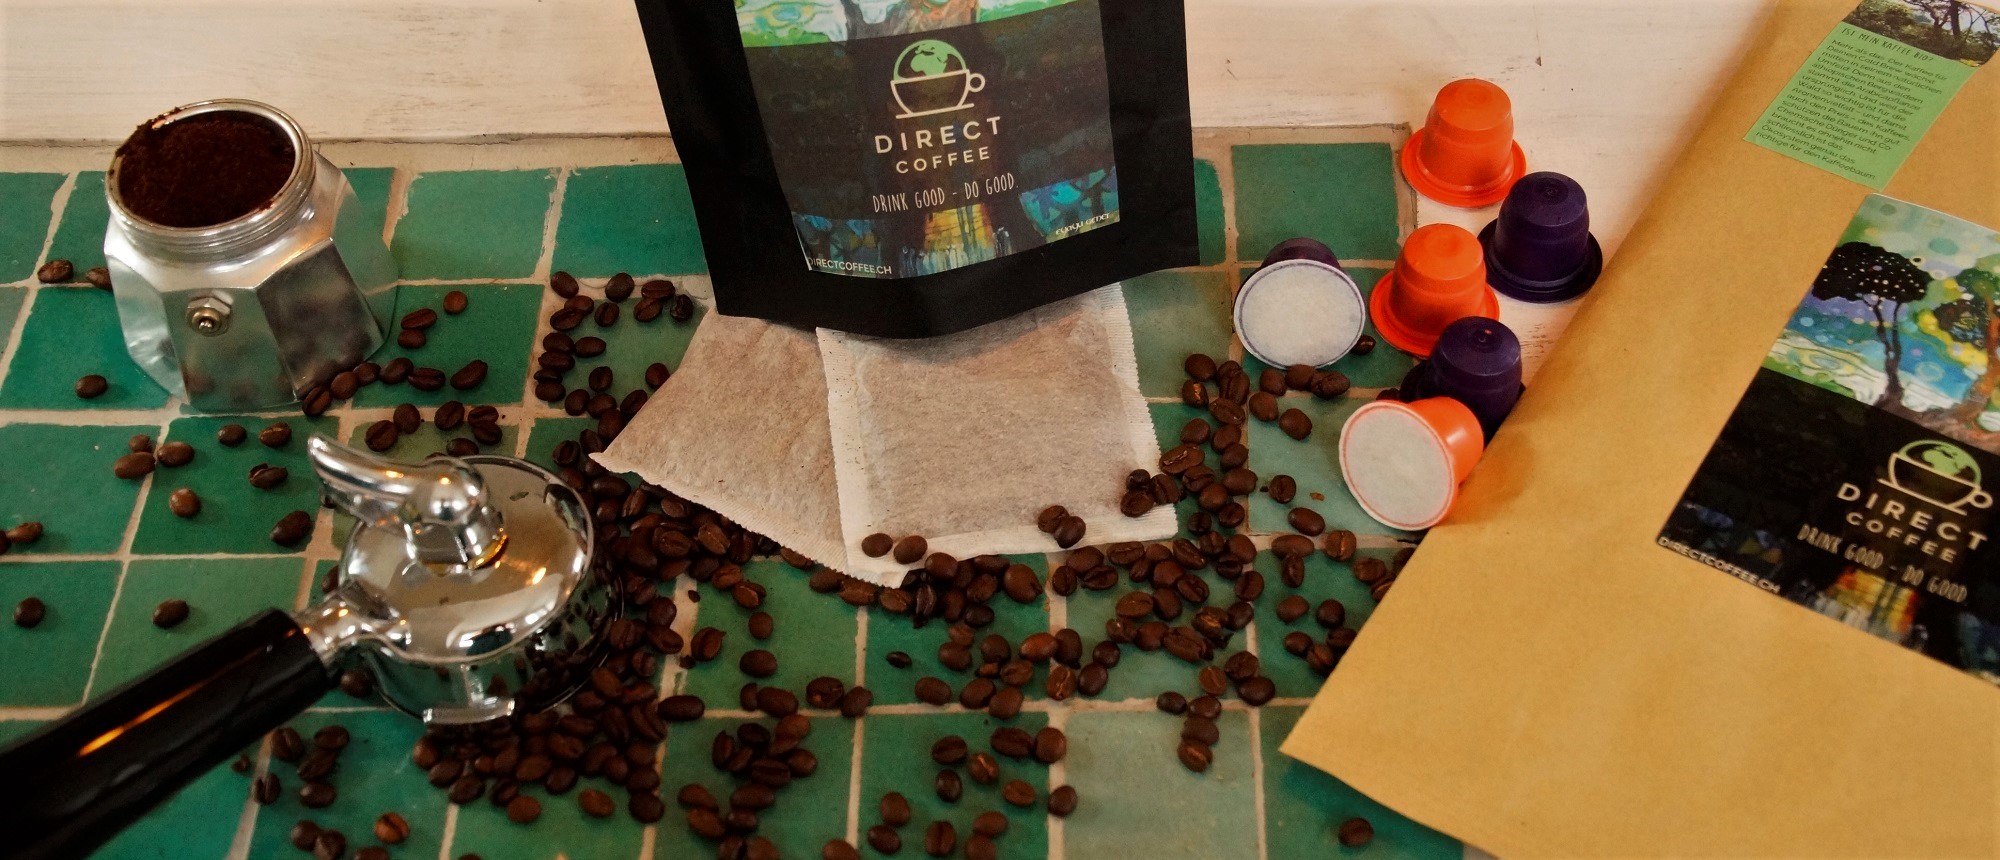 Less waste through coffee-mailer and biodegradable capsules